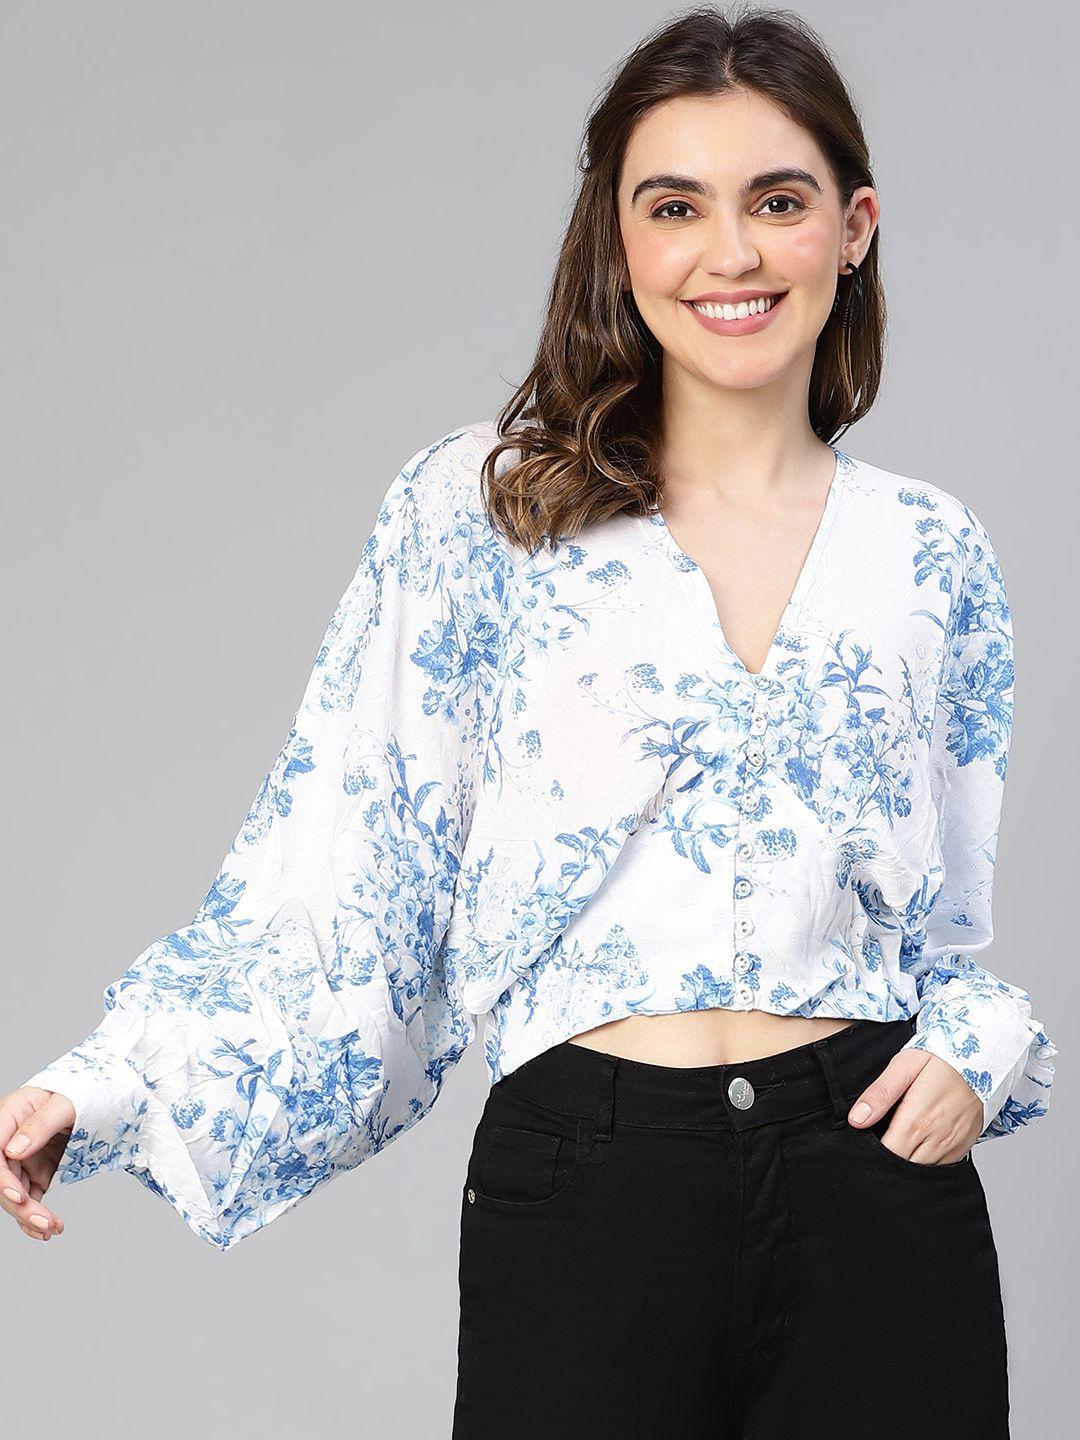 oxolloxo-floral-print-puff-sleeve-elasticated-crop-top